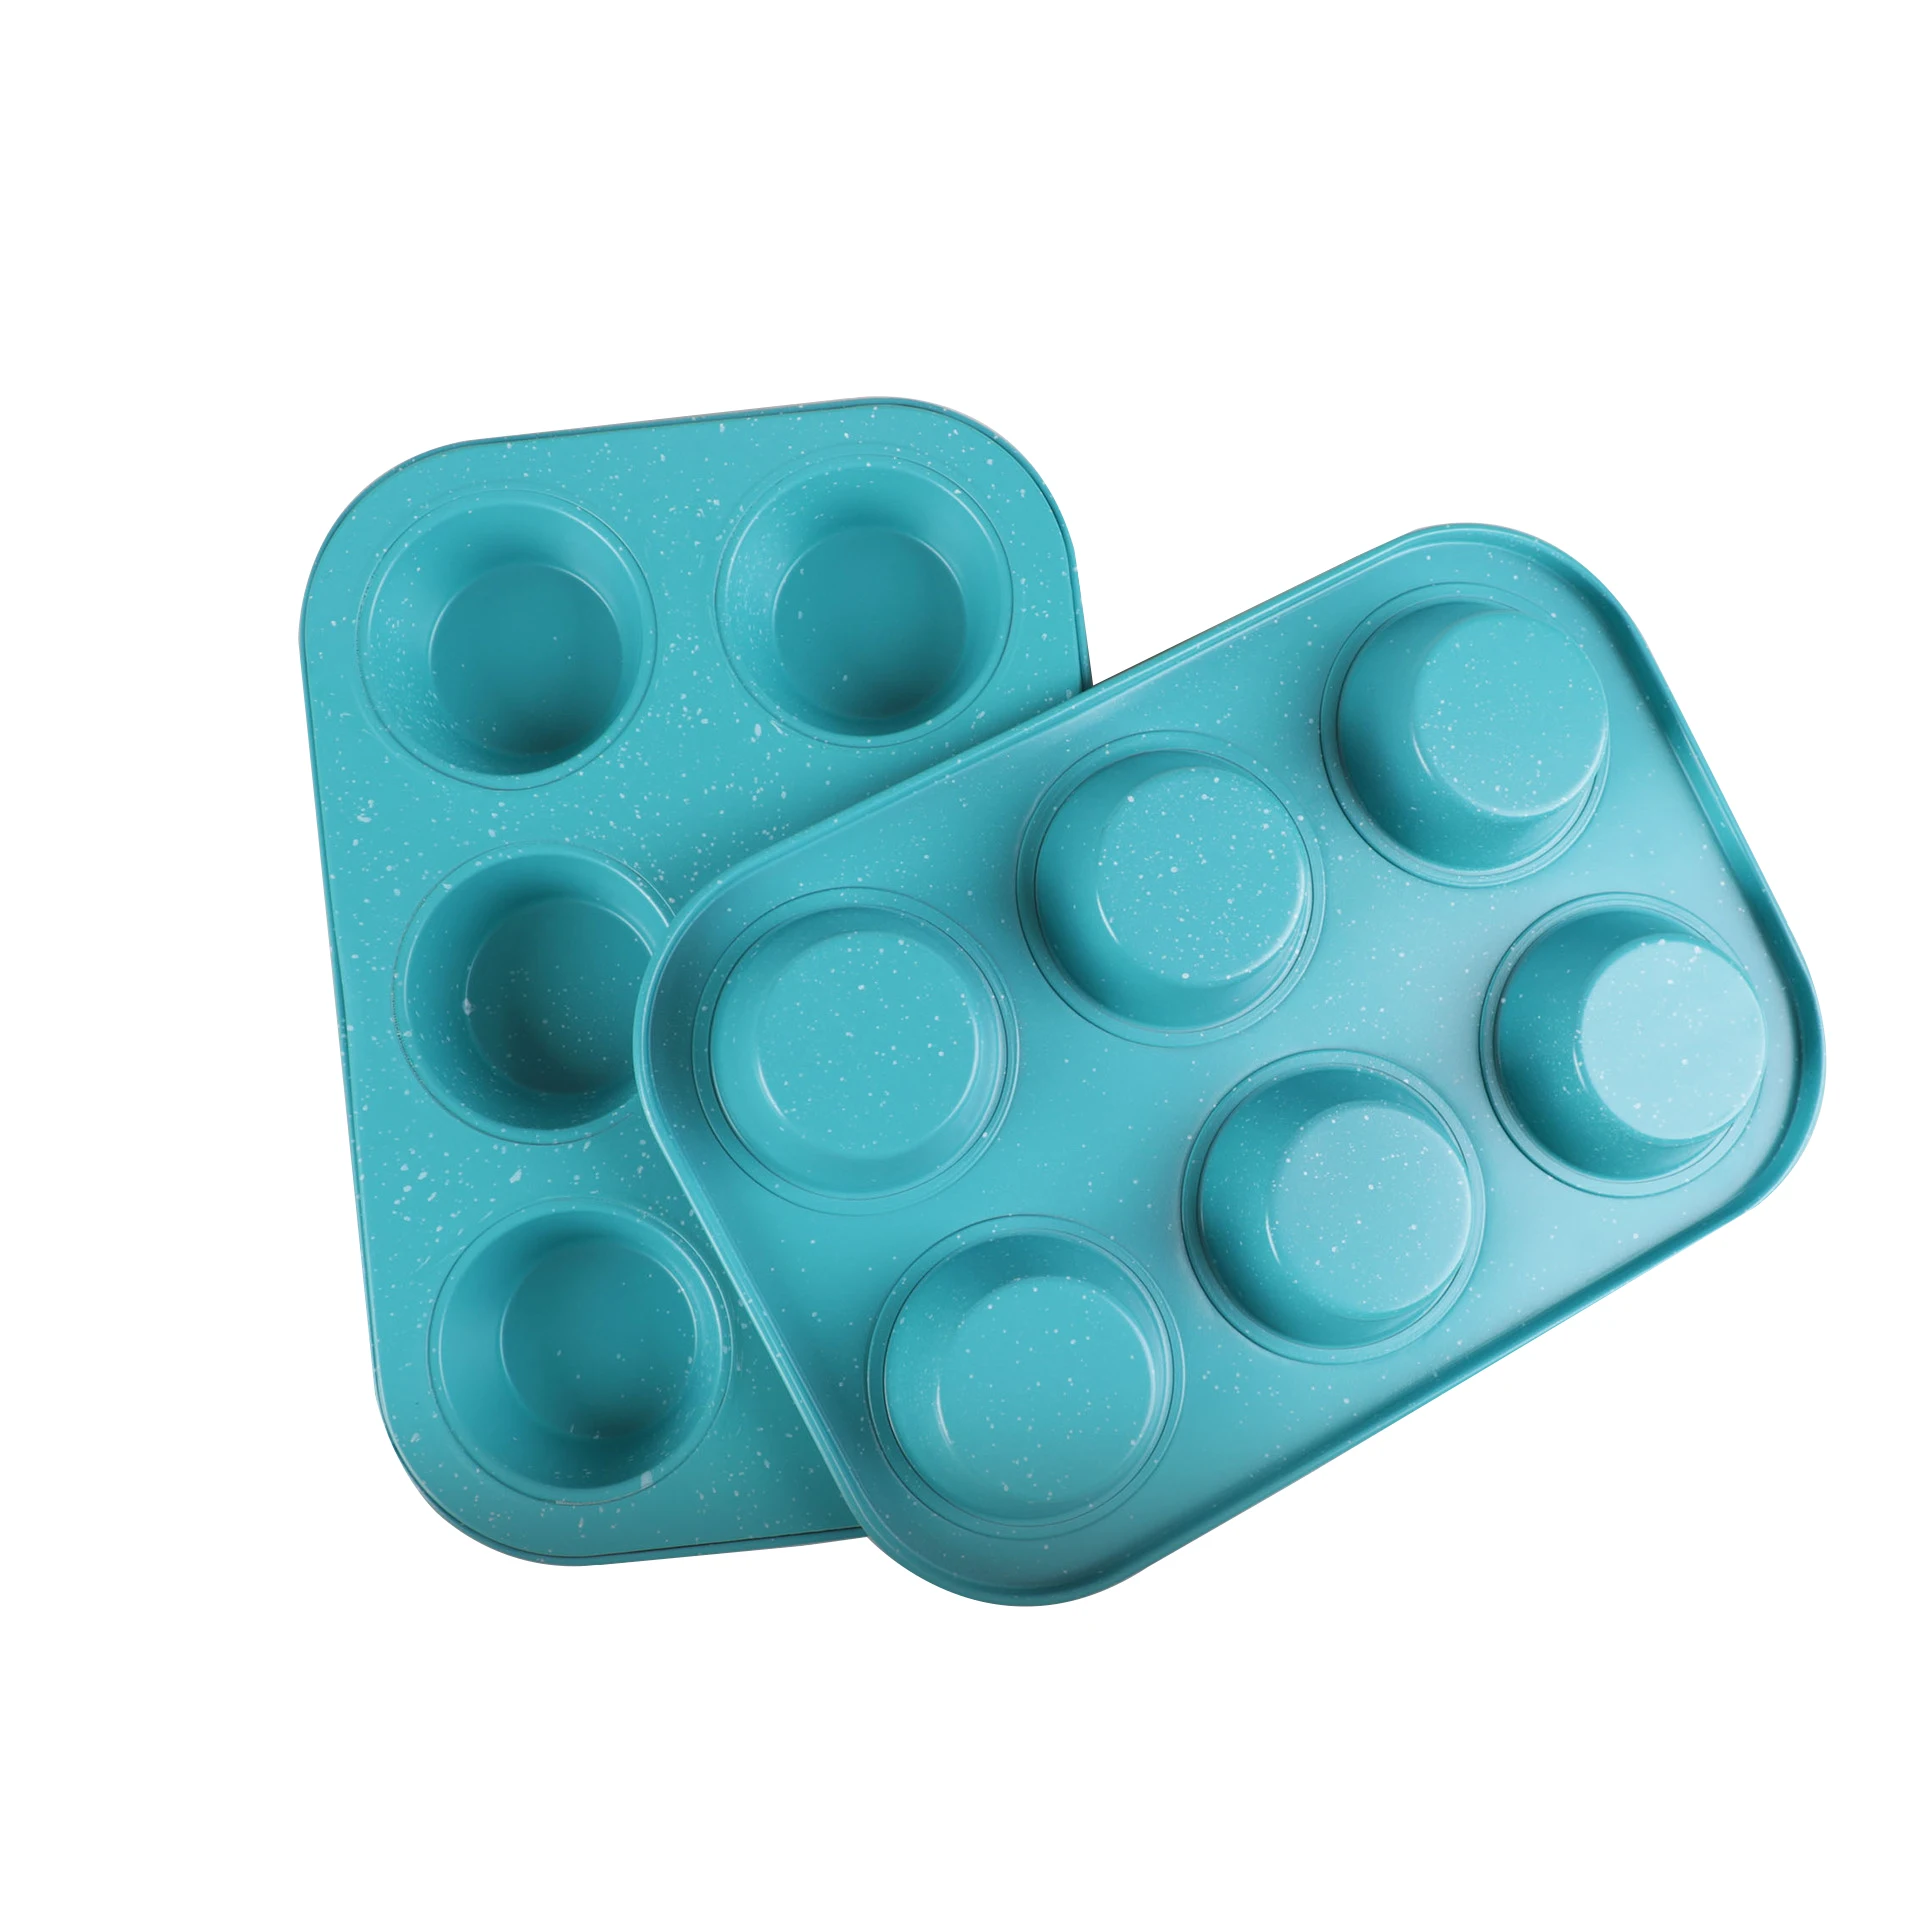 

Kitchen High Quality Metal Carbon Steel Baking Cup Cake Muffin Pan Non stick Coating Sprinkled 6 Holes Cupcake Mold